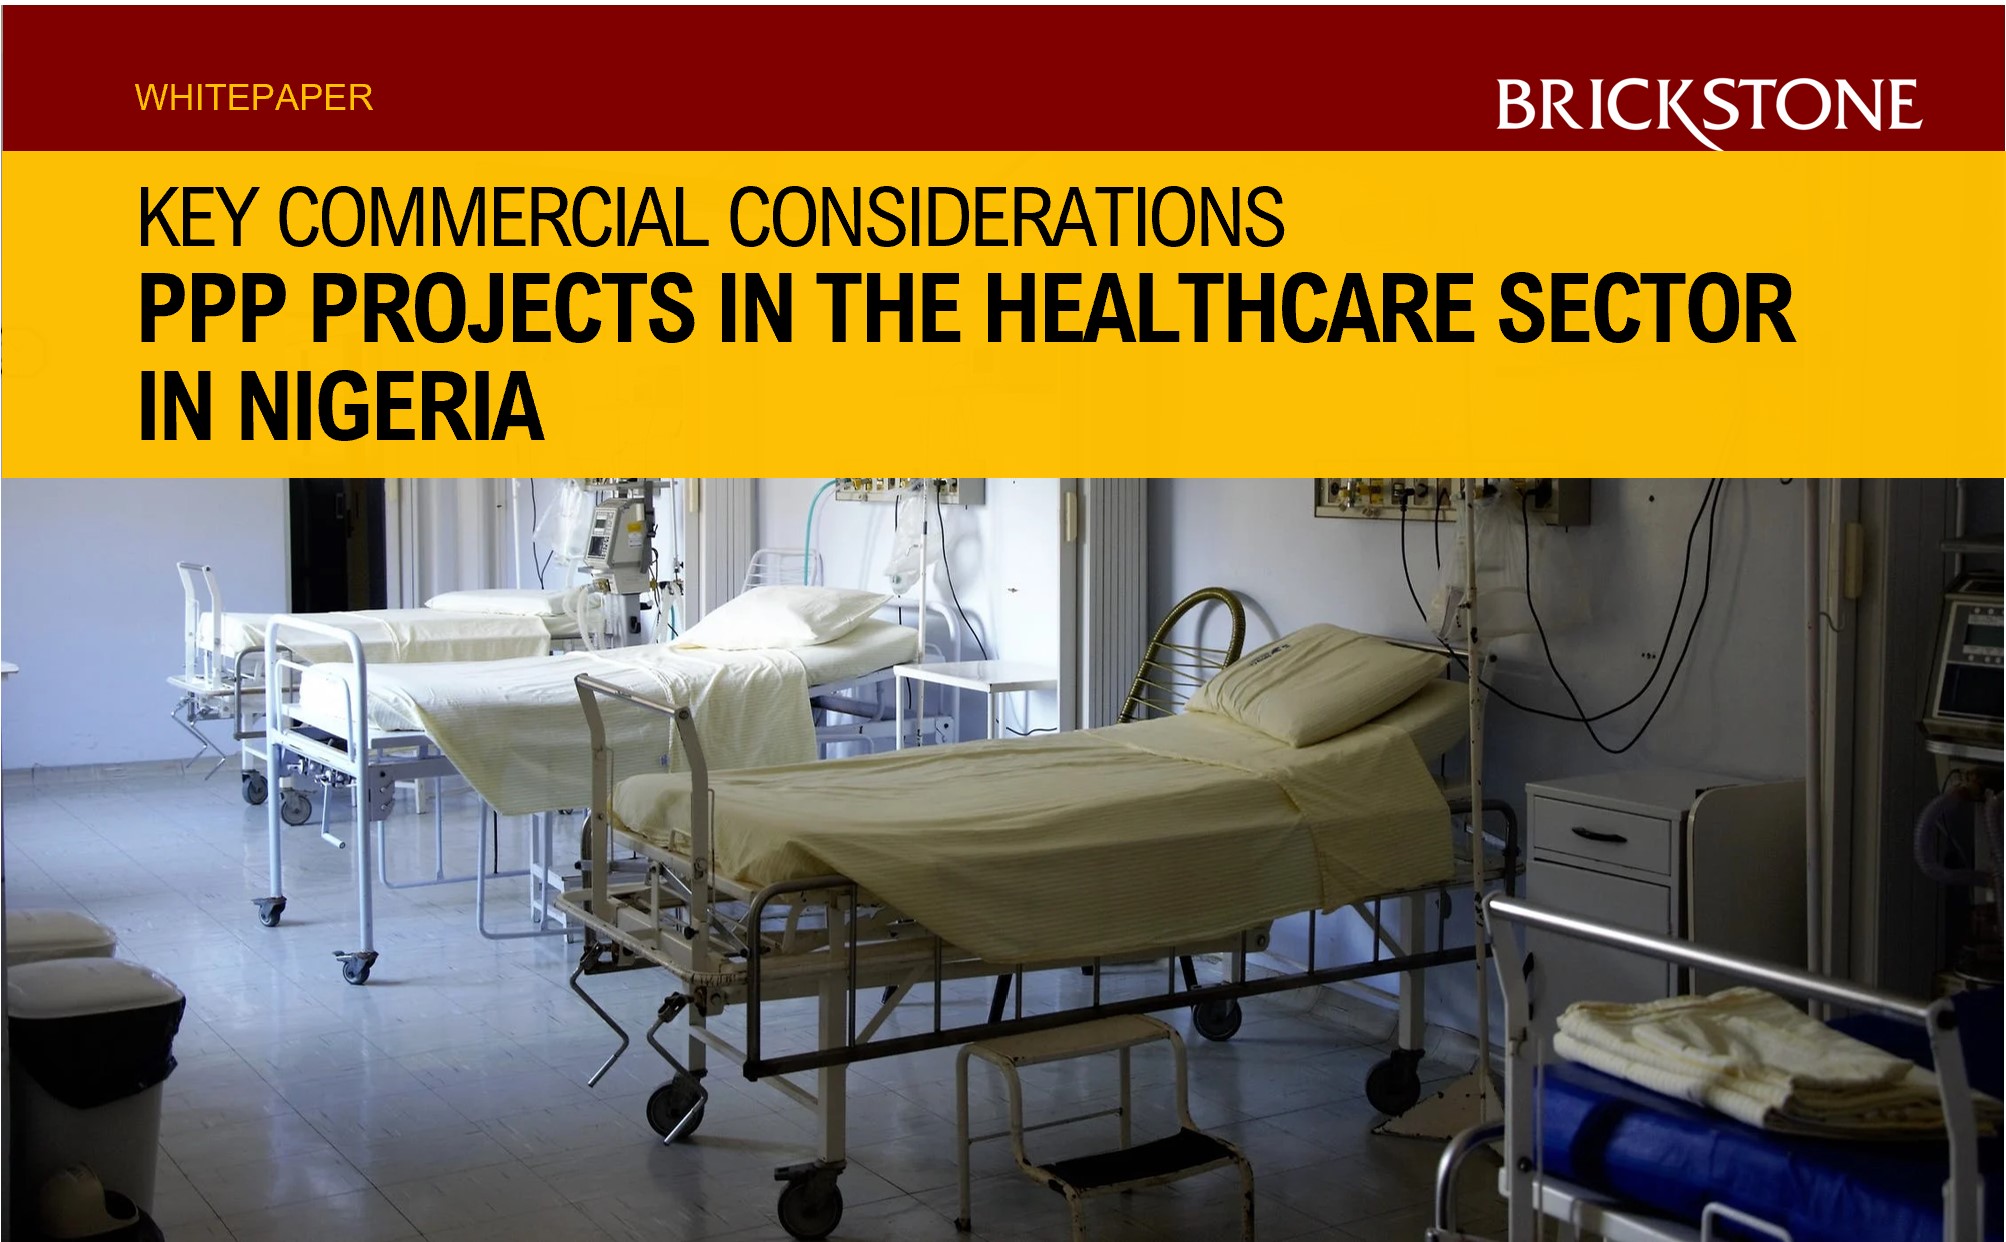 PPP Projects in the Healthcare Sector